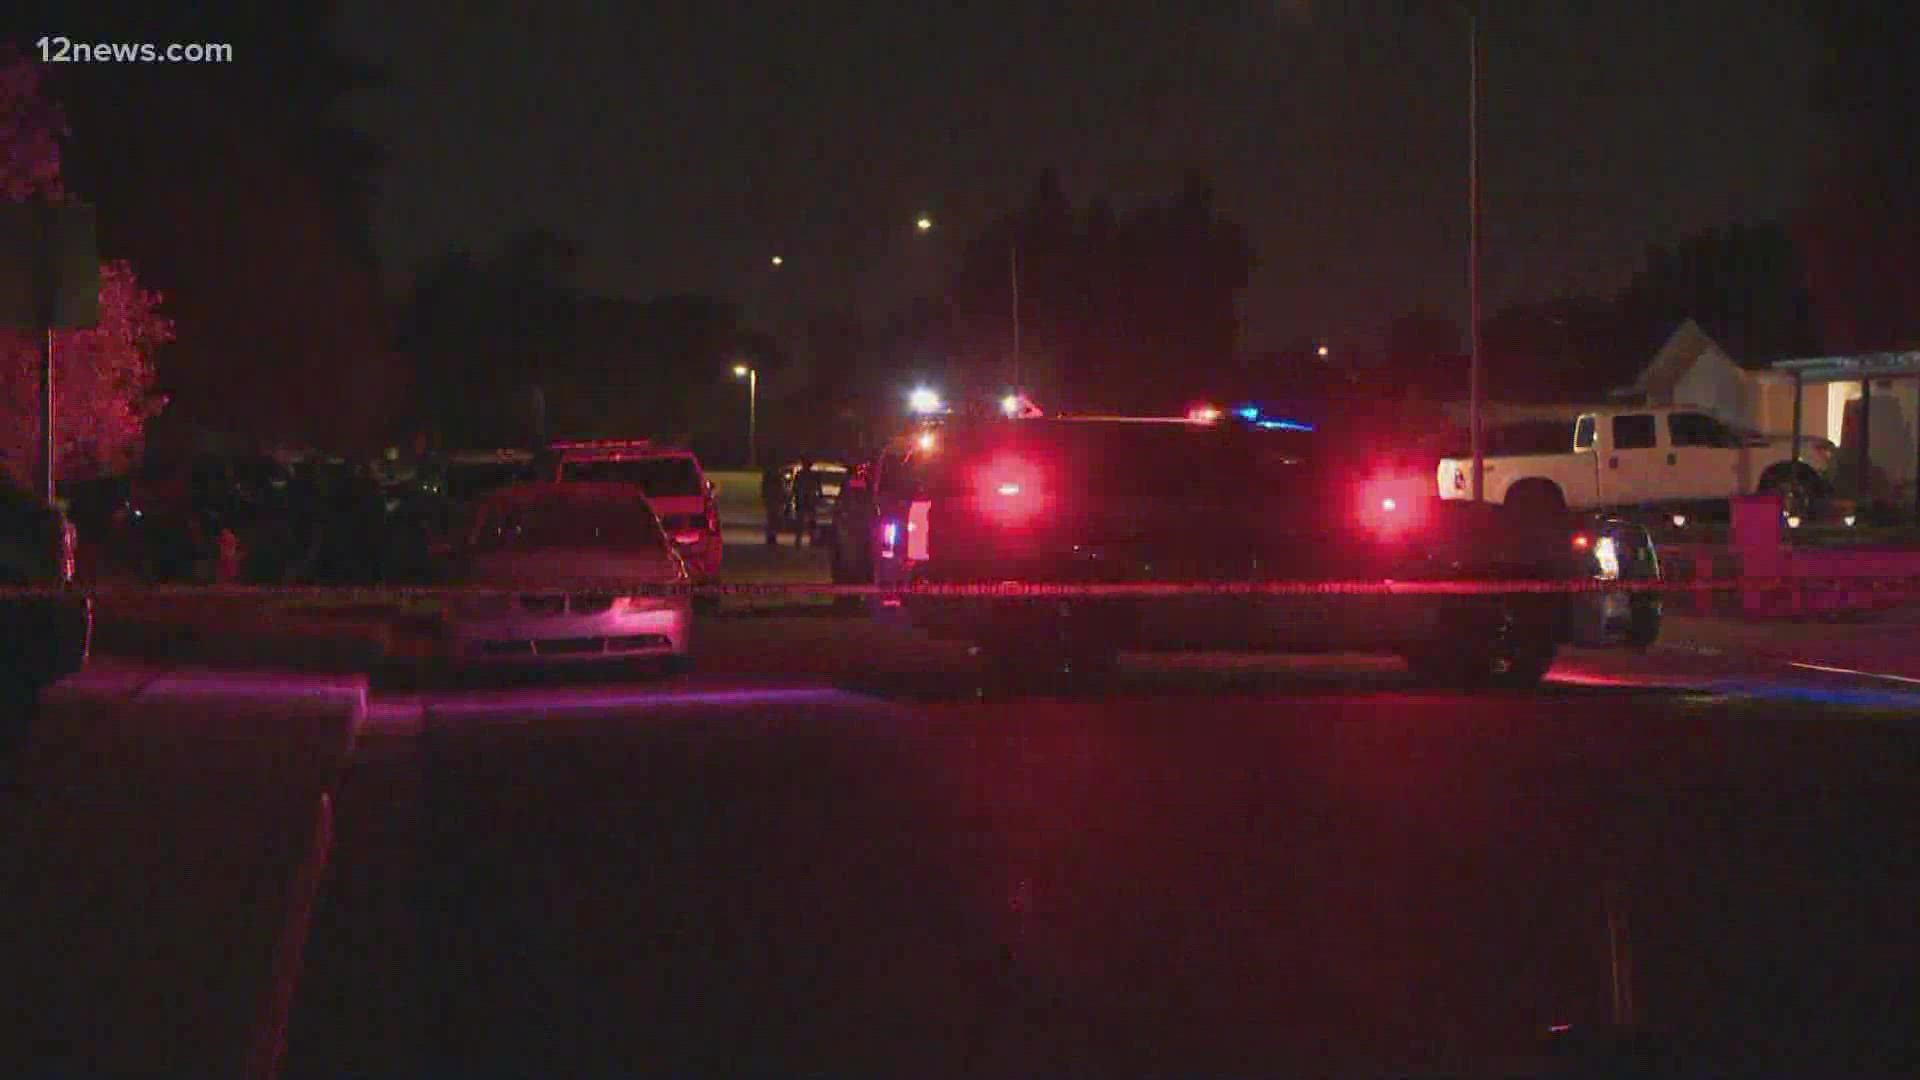 Phoenix police are in a standoff with a man who investigators said shot at officers Tuesday night.